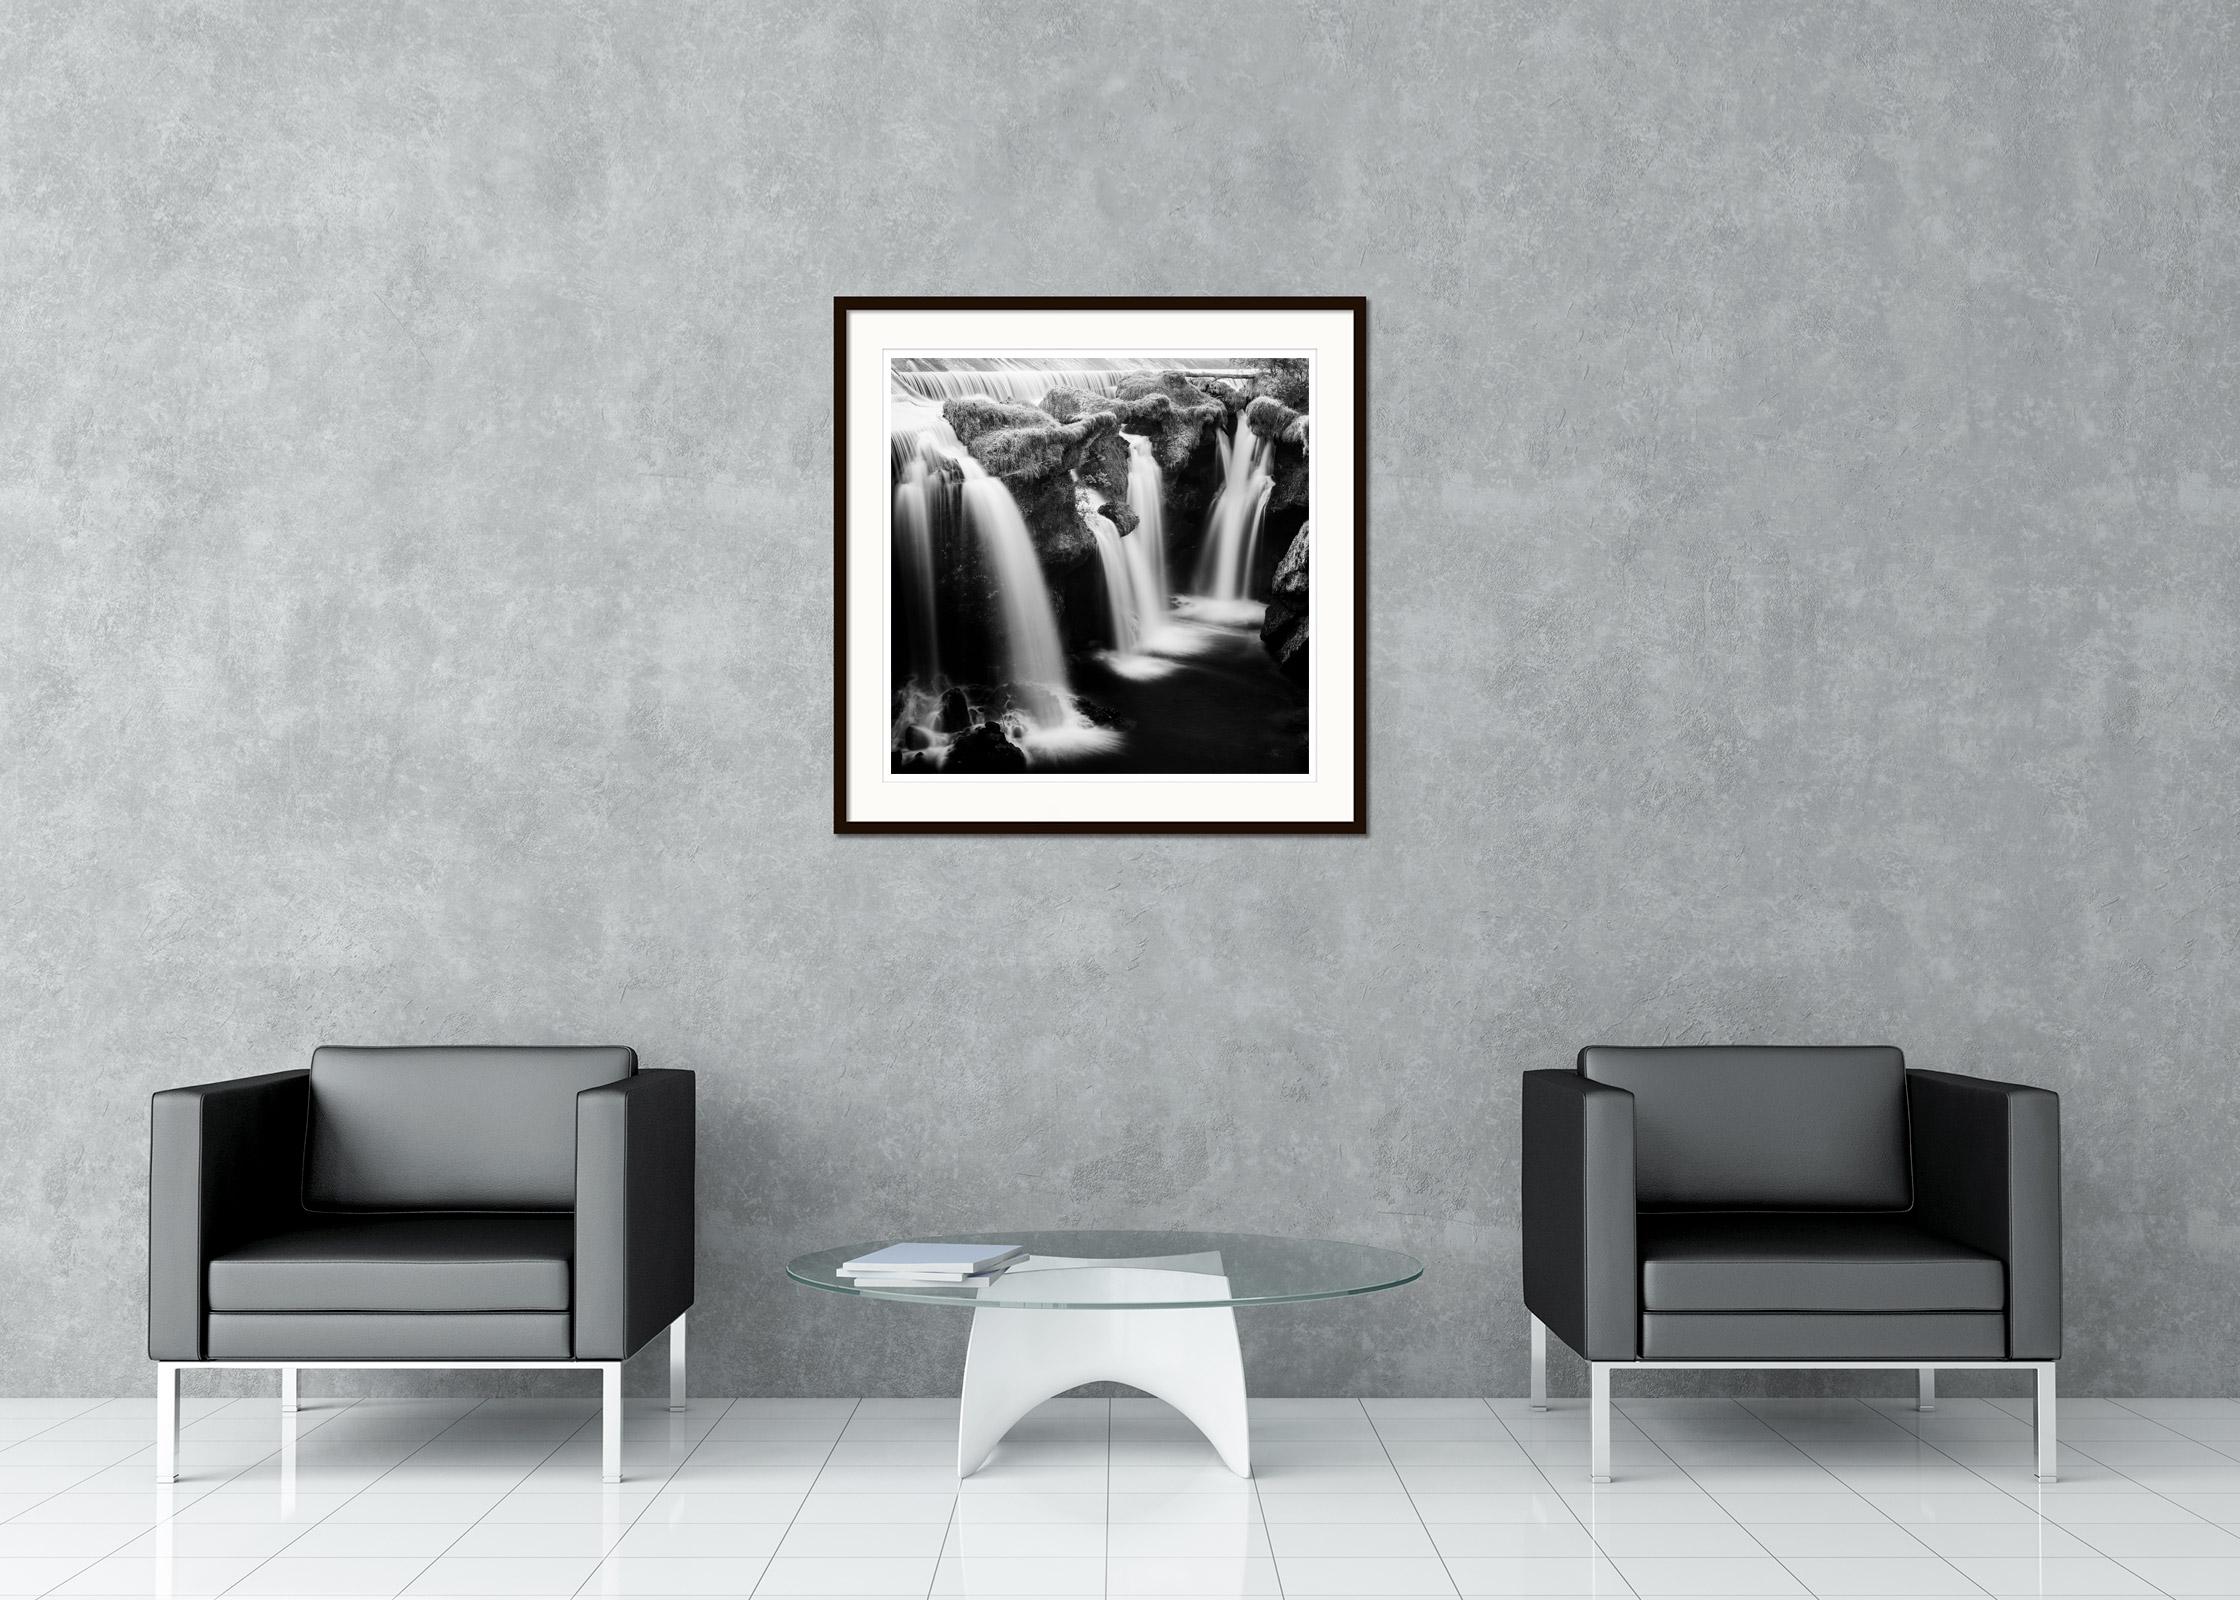 Black and white fine art long exposure waterscape - landscape photography print. Archival pigment ink print, edition of 8. Signed, titled, dated and numbered by artist. Certificate of authenticity included. Printed with 4cm white